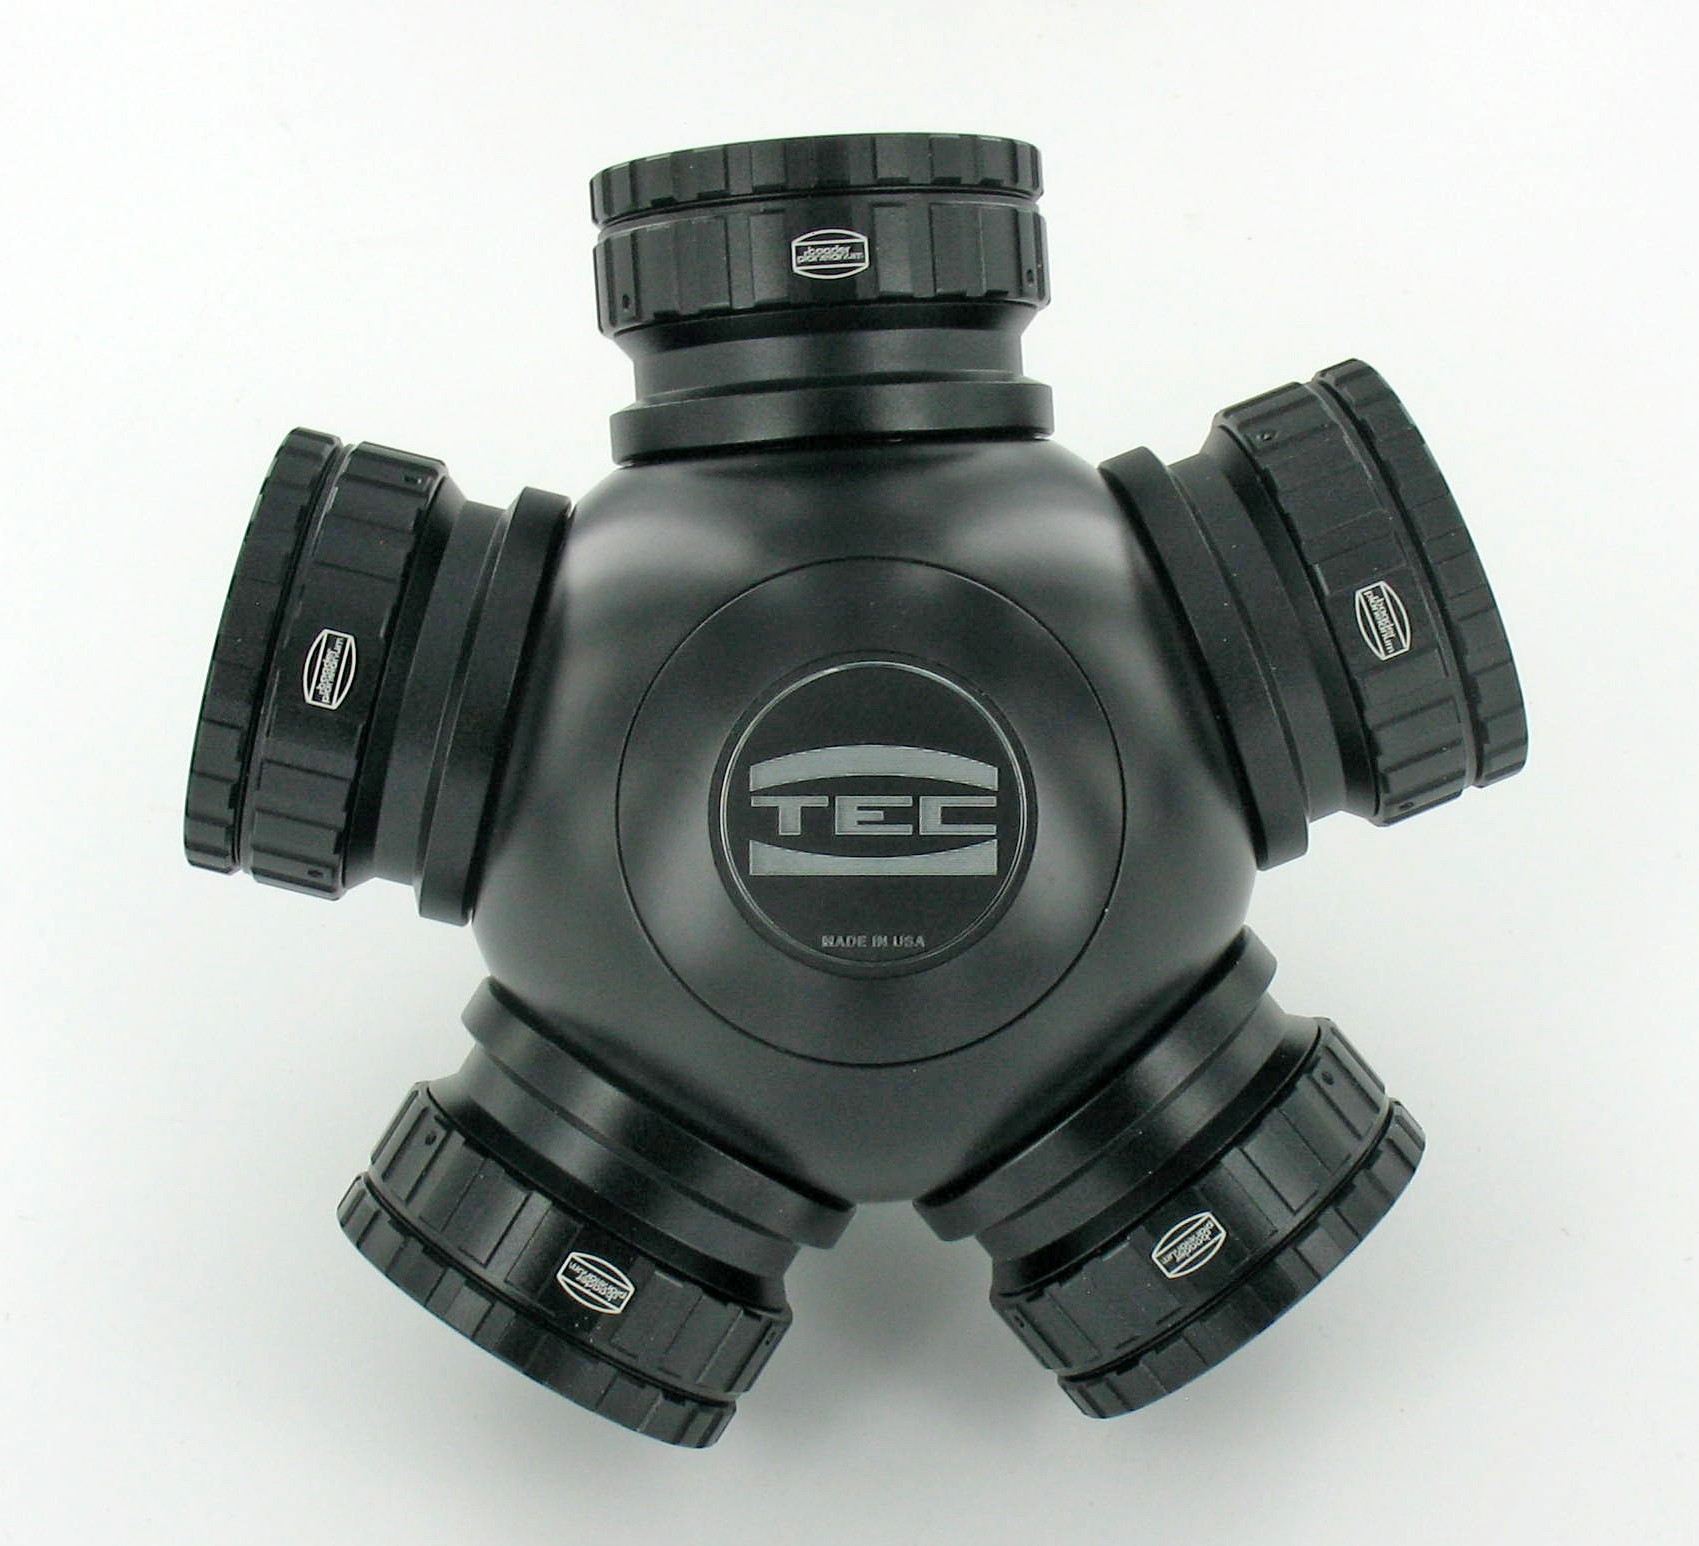 TEC eyepiece turret 5-fold with Baader ClickLock clamps